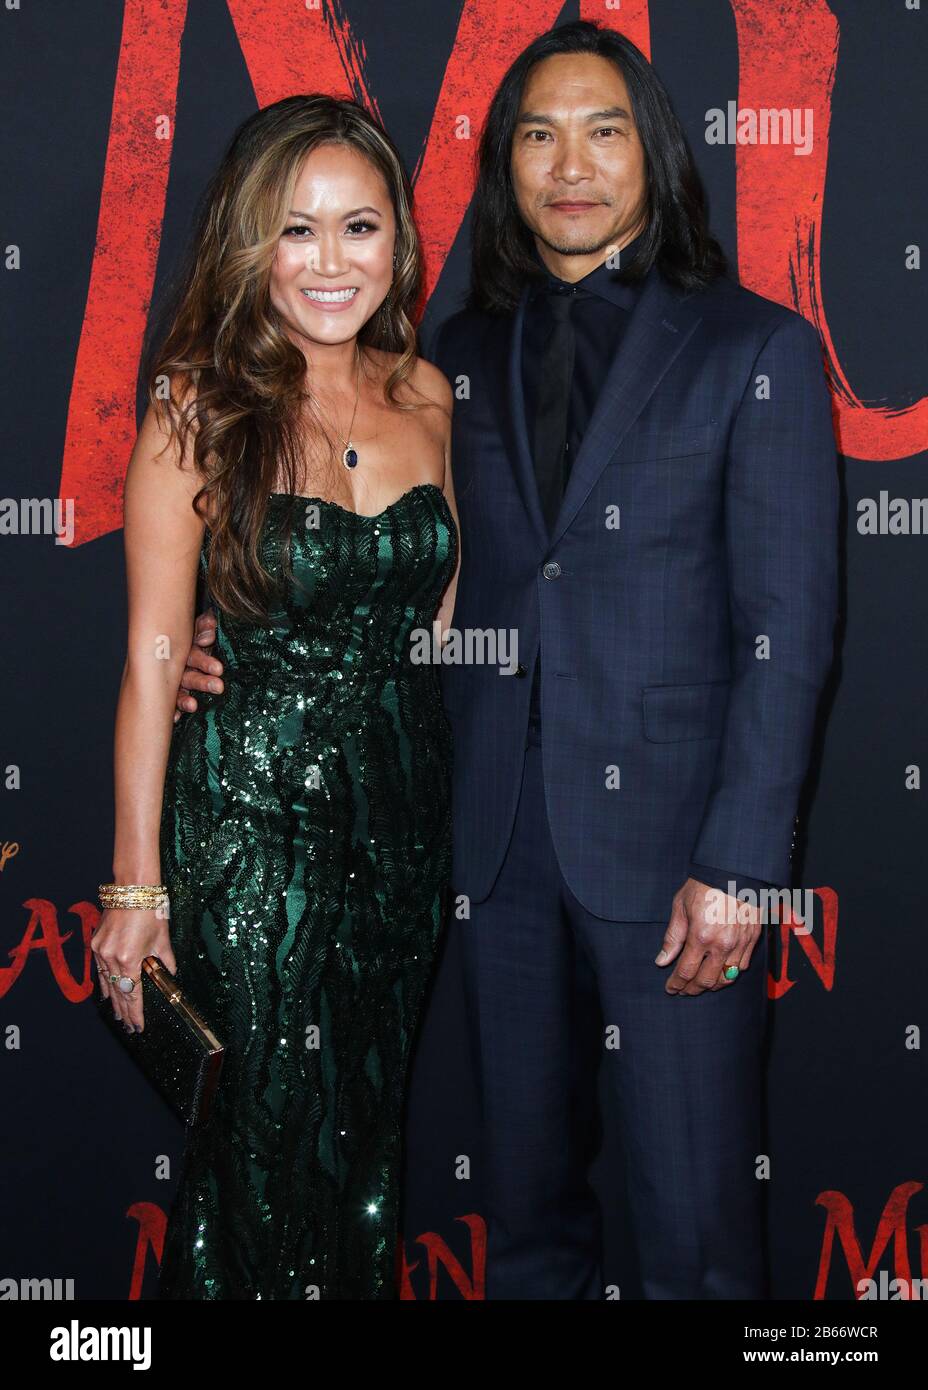 Hollywood, United States. 09th Mar, 2020. HOLLYWOOD, LOS ANGELES, CALIFORNIA, USA - MARCH 09: Diana Chan and husband/actor Jason Scott Lee arrive at the World Premiere Of Disney's 'Mulan' held at the El Capitan Theatre and Dolby Theatre on March 9, 2020 in Hollywood, Los Angeles, California, United States. (Photo by Xavier Collin/Image Press Agency) Credit: Image Press Agency/Alamy Live News Stock Photo